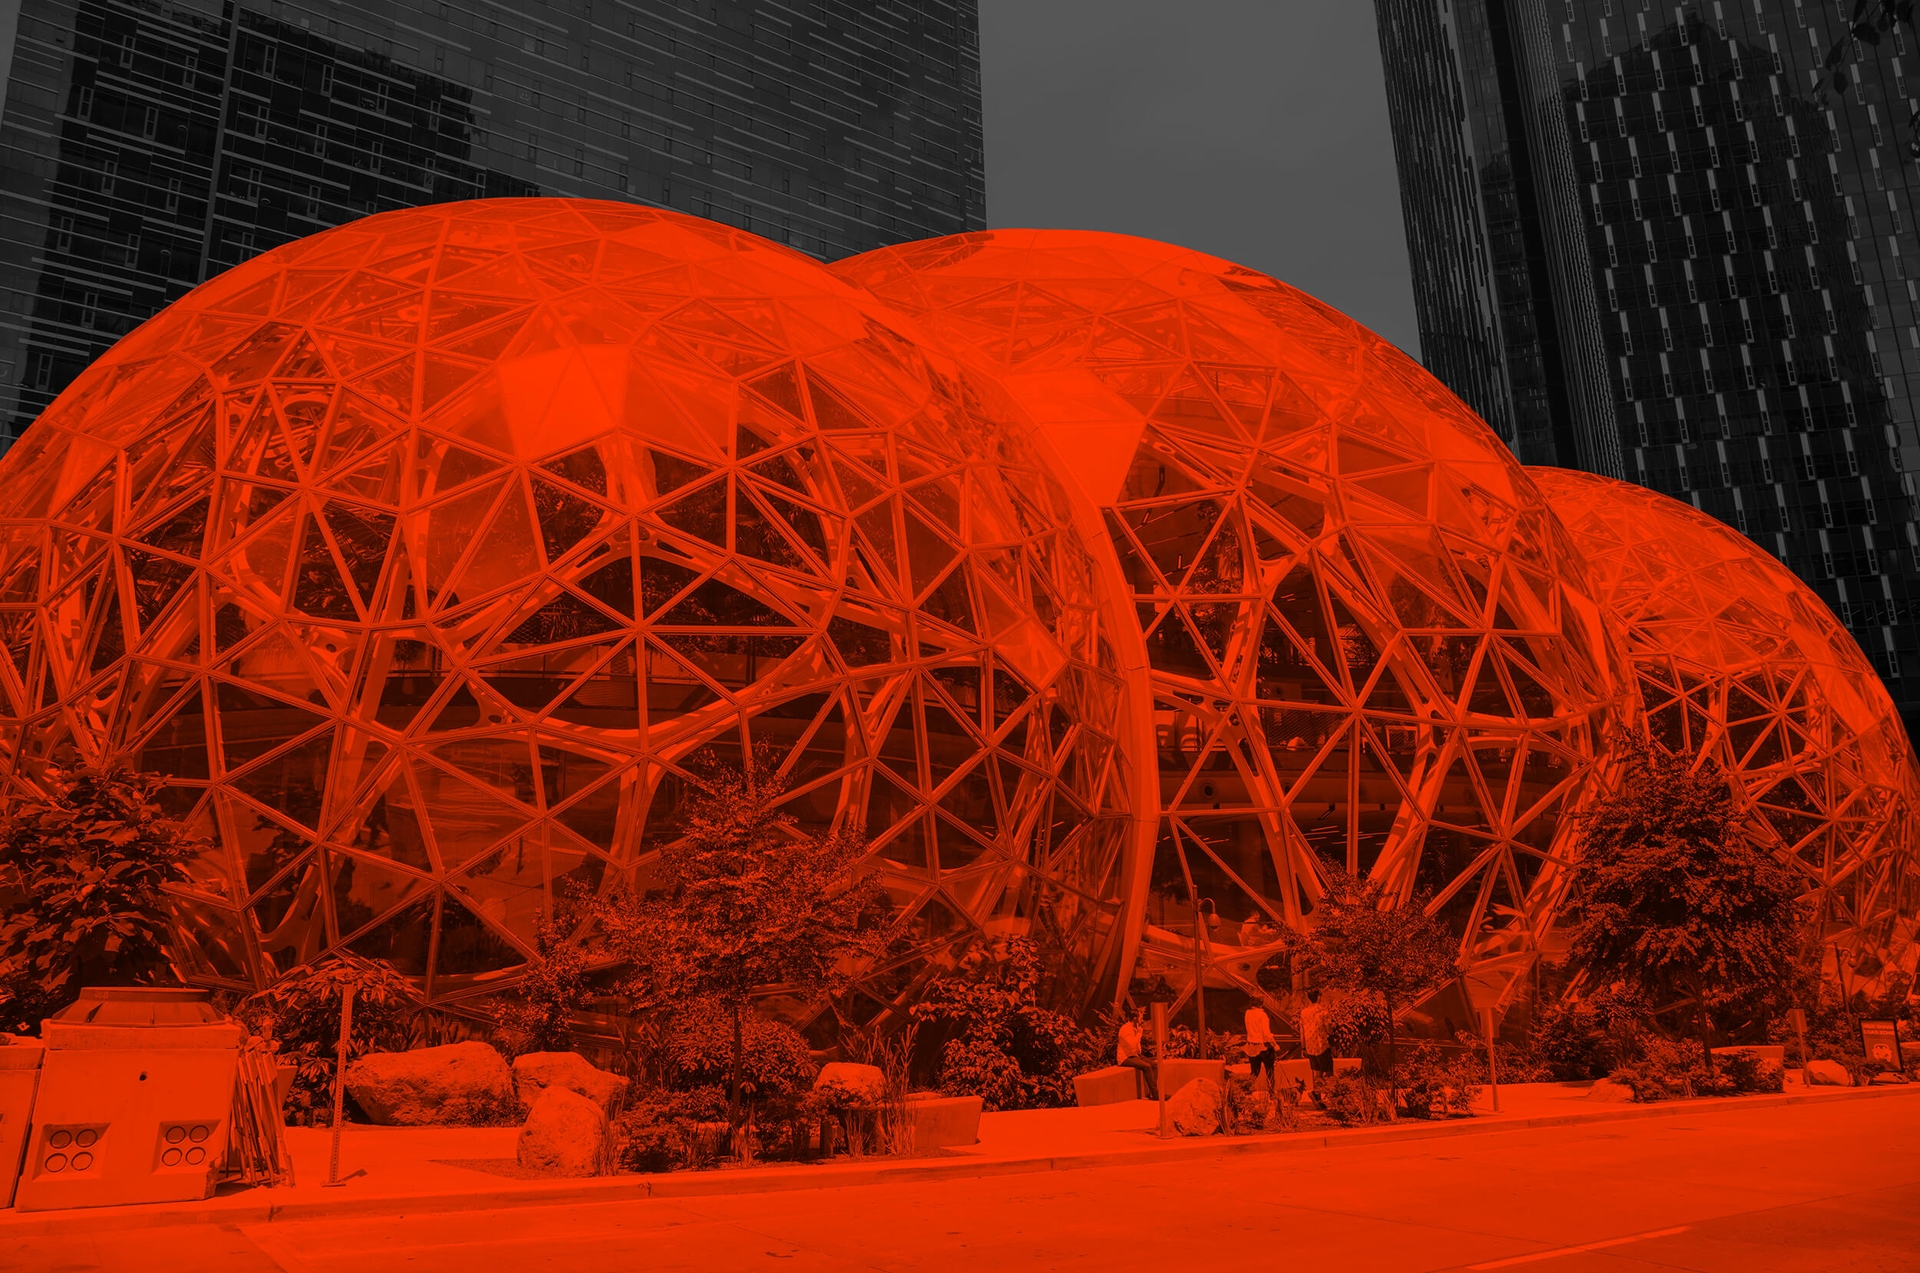 Online retailer Amazon’s biosphere made up of three giant three-story glass orbs is a workspace for Amazon employees, with limited public access.